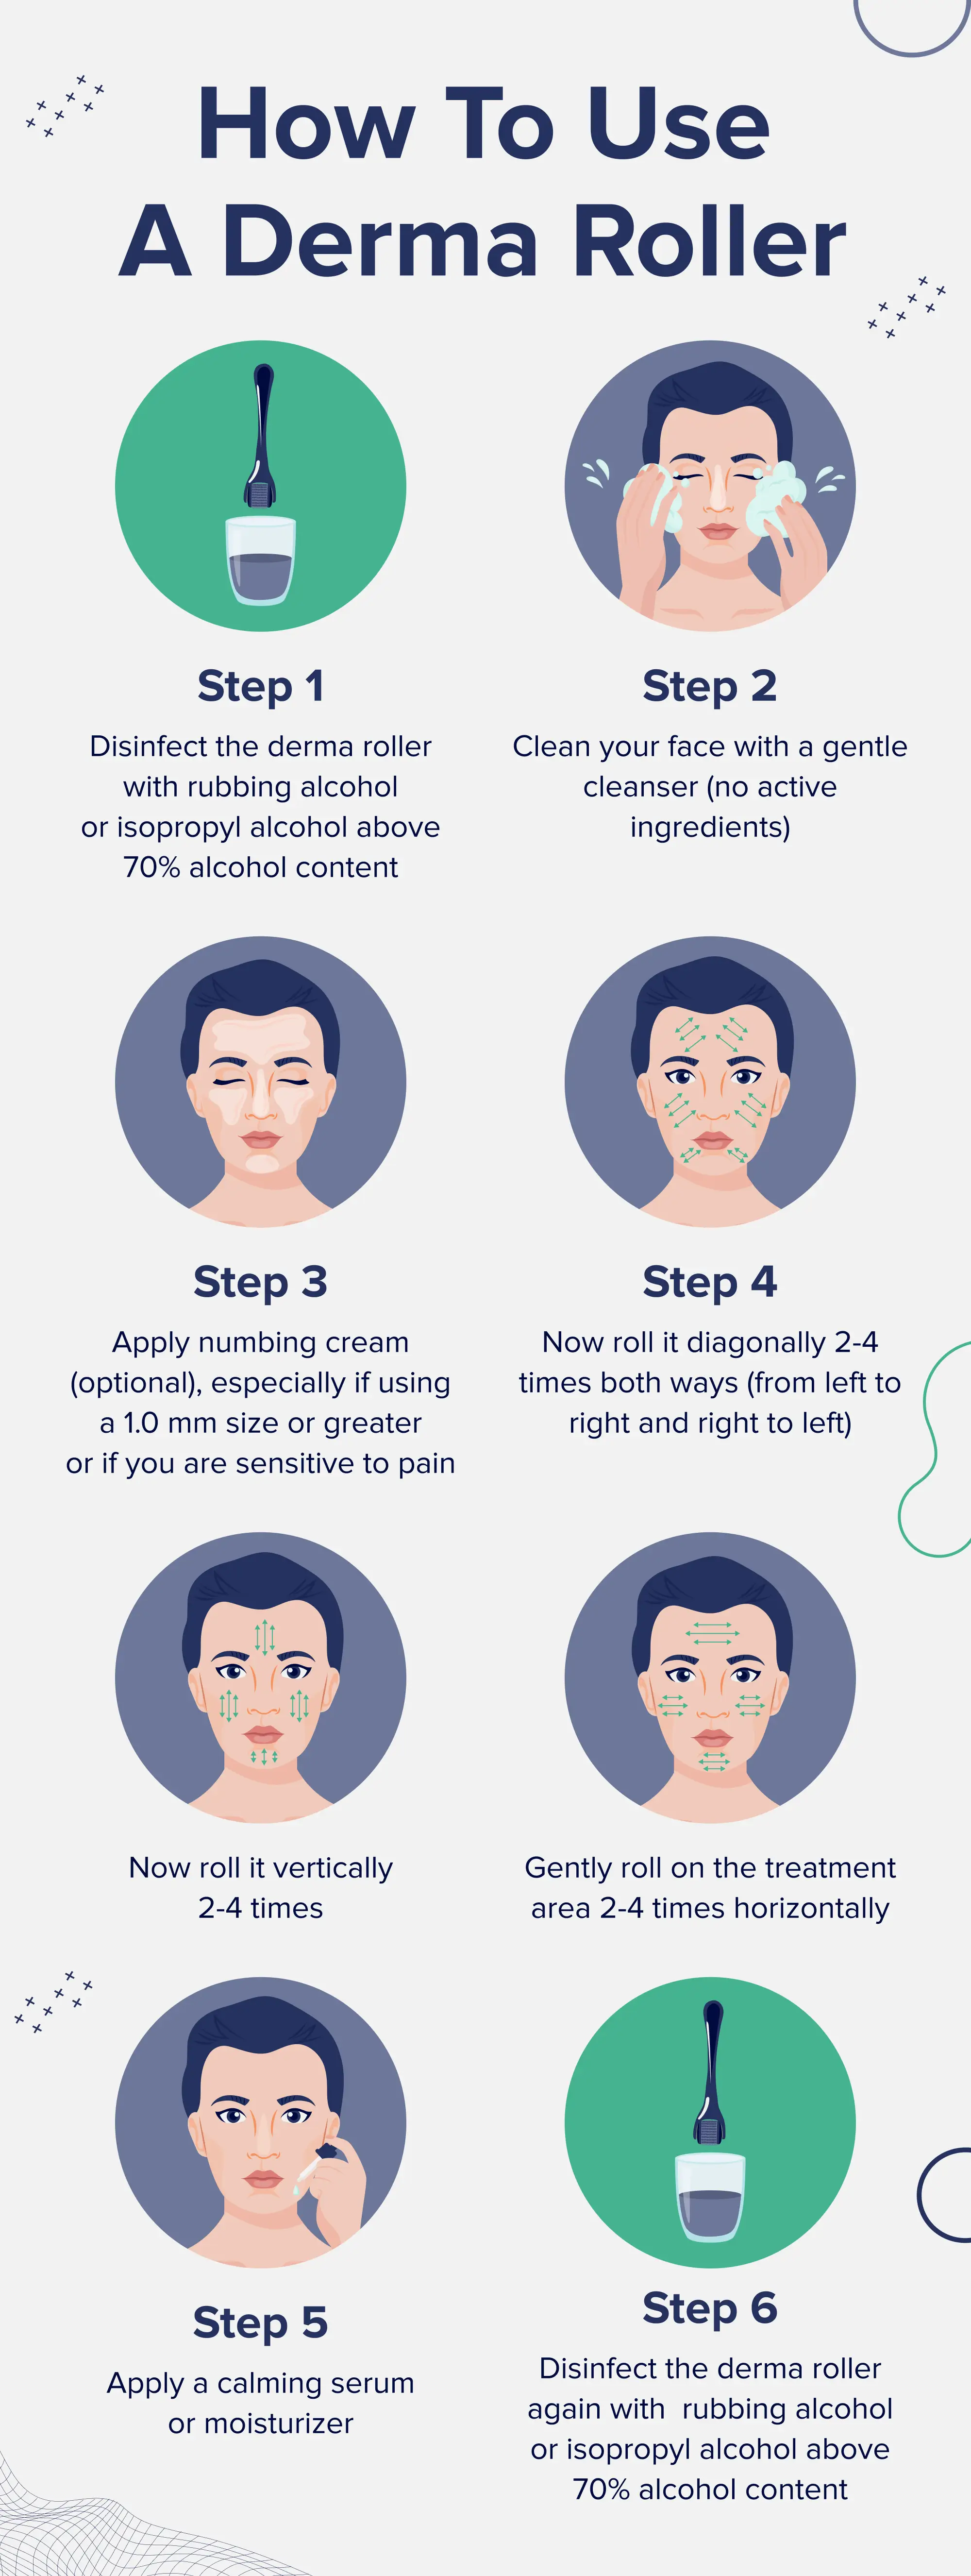 A step-by-step visual guide on how to use using a derma roller.